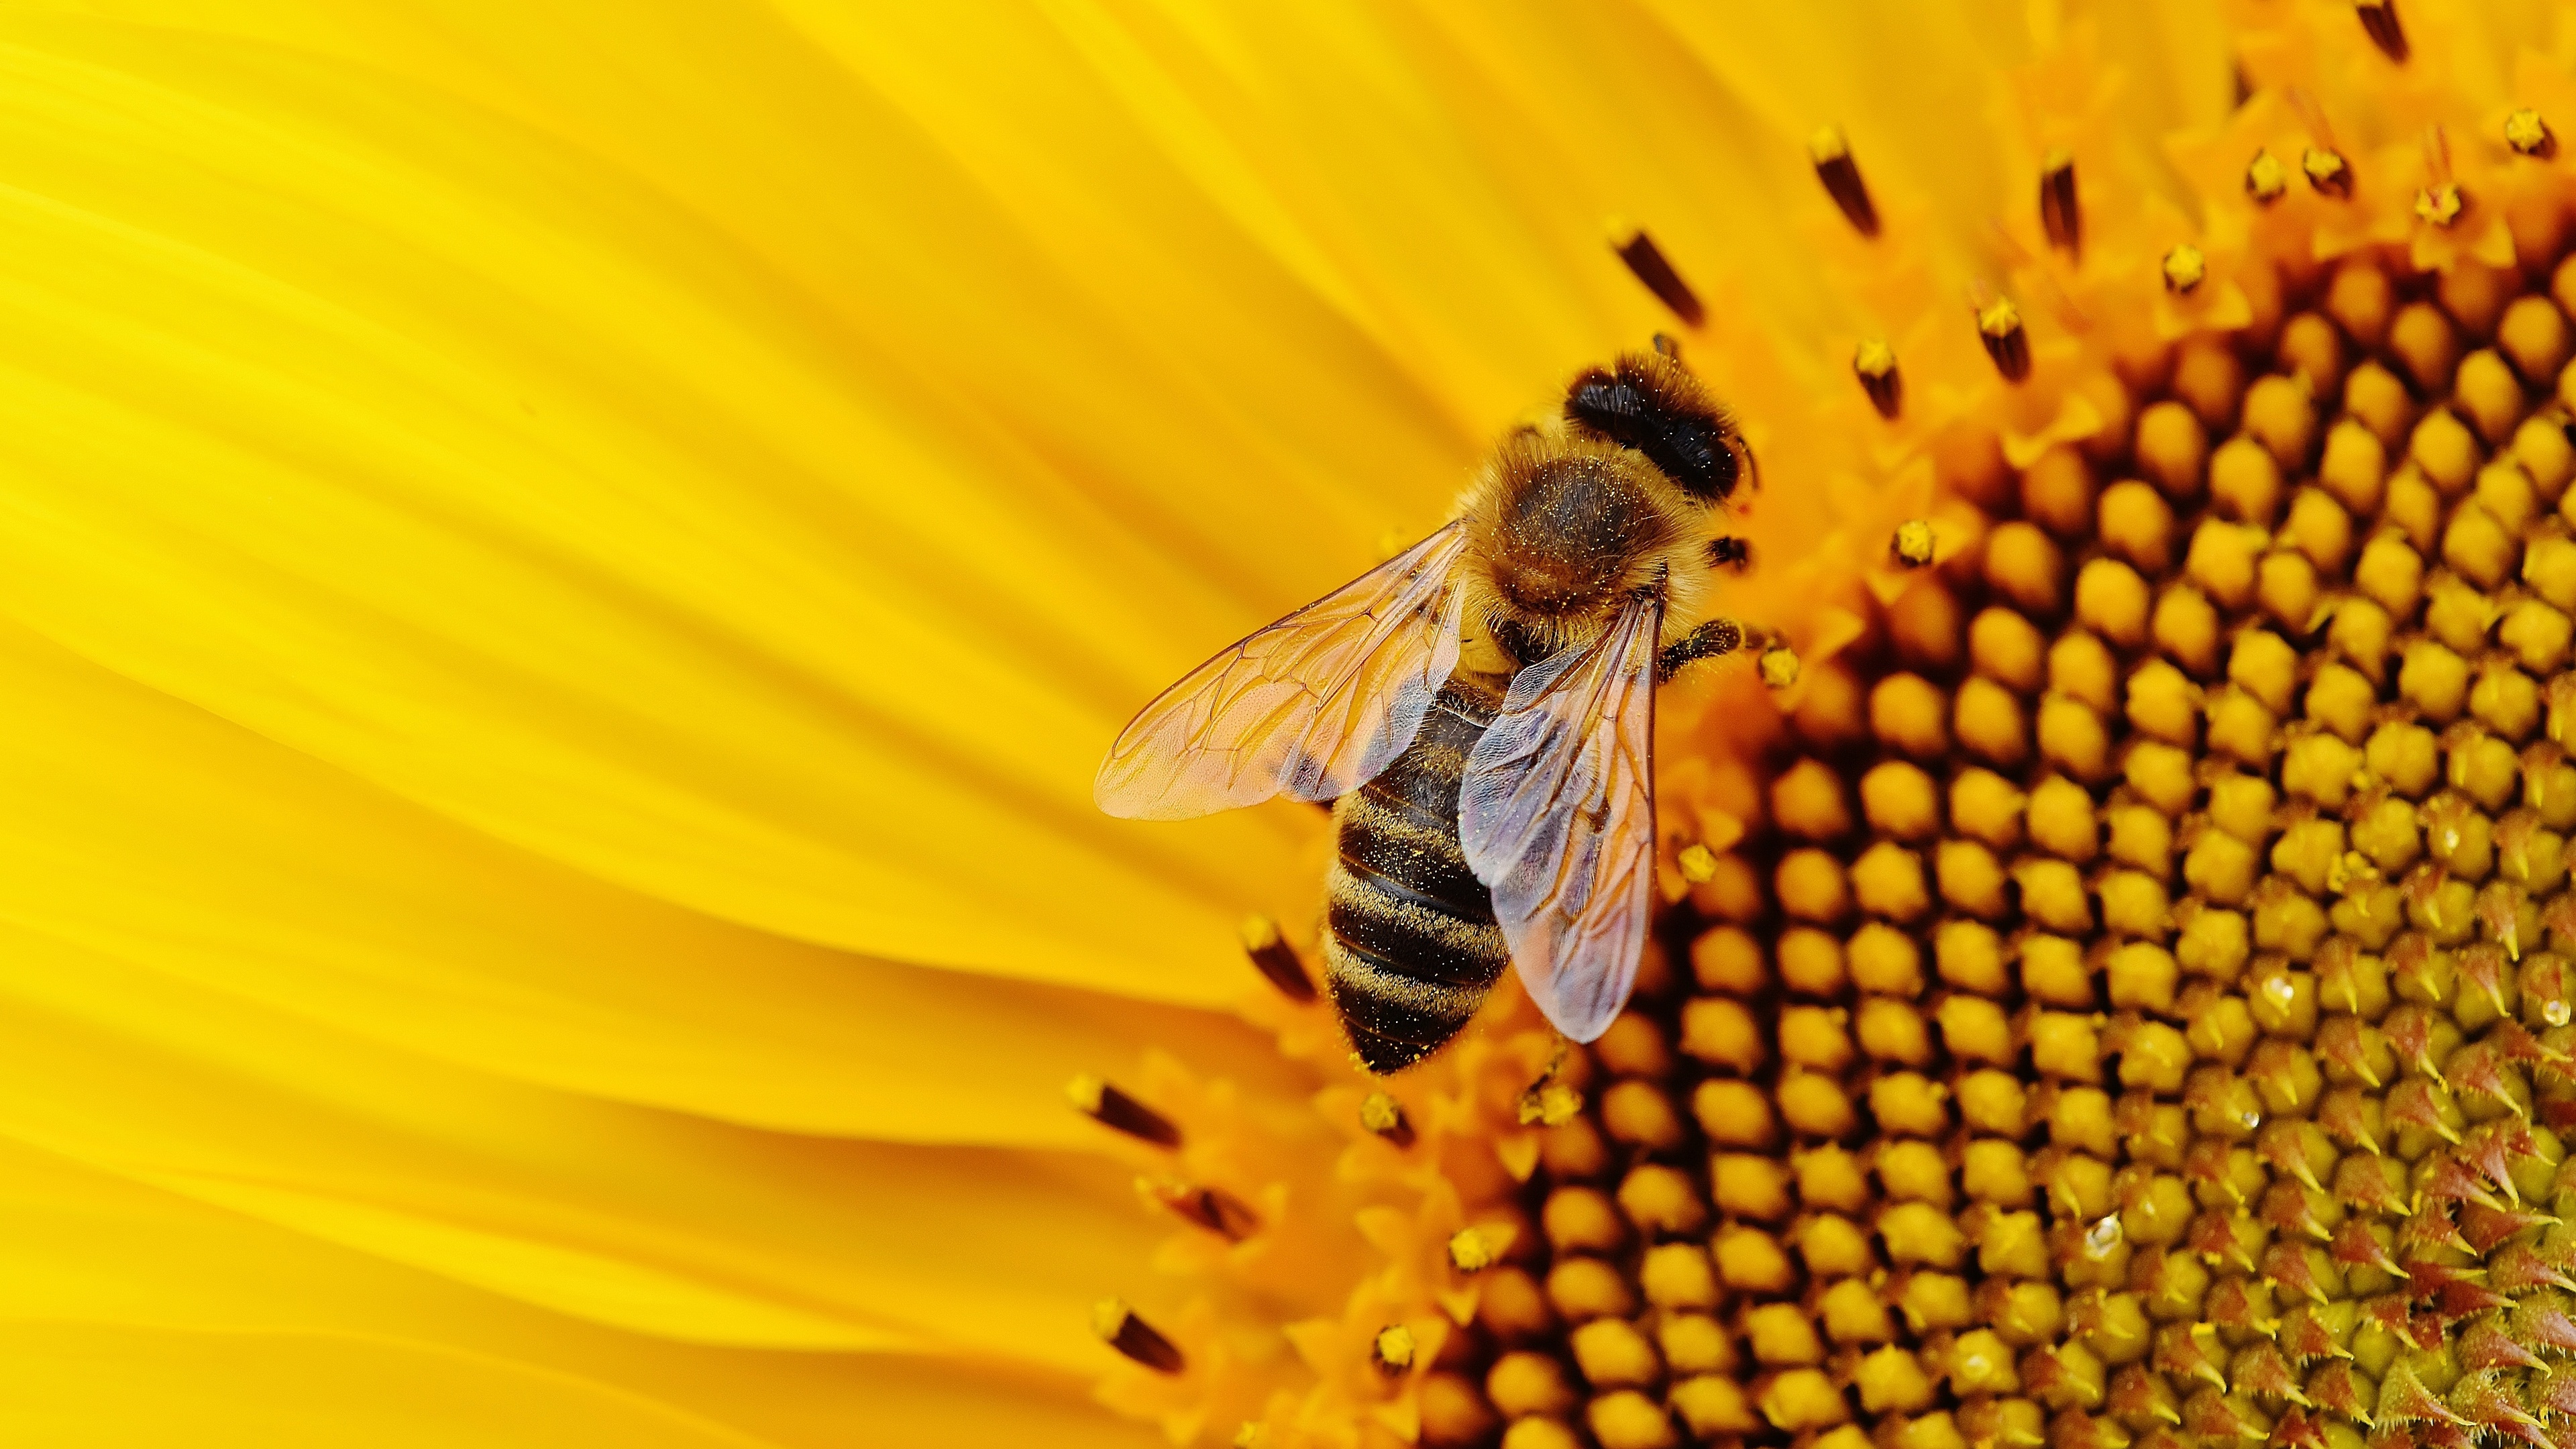 Bee: Known for their keystone role in pollination of the world's plants. 3840x2160 4K Wallpaper.